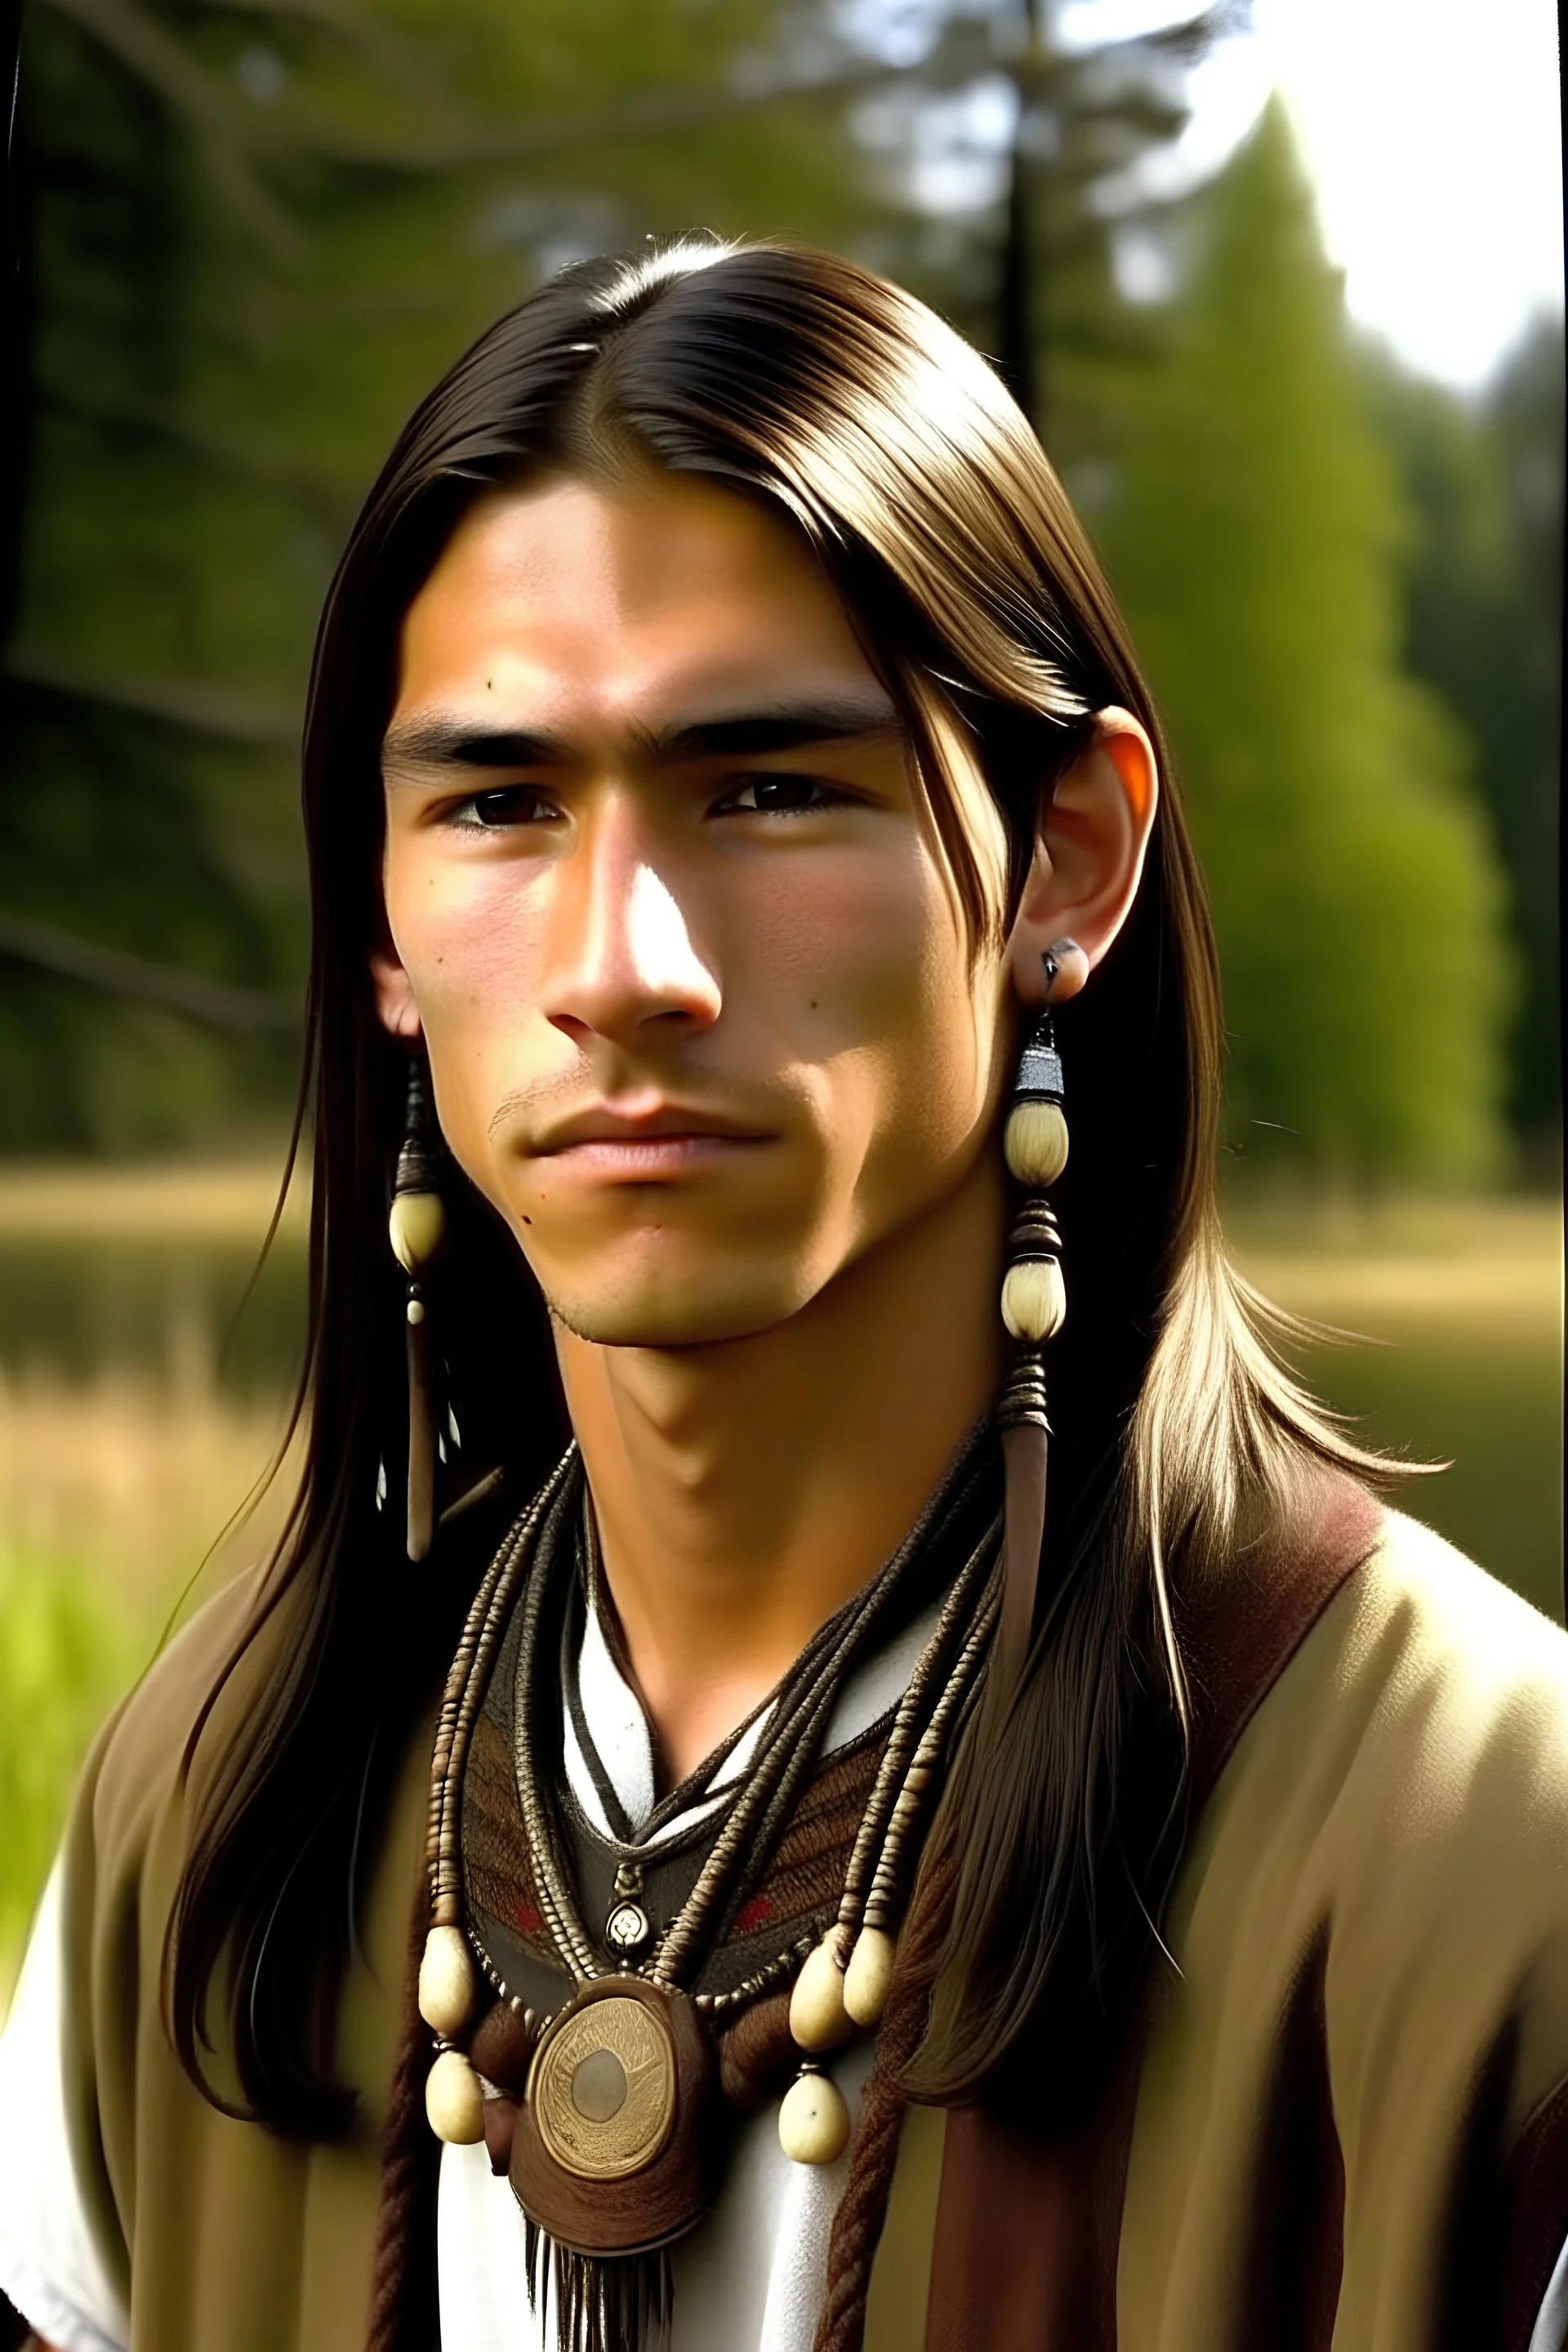 20 year old handsome native american, tall, muskulös,